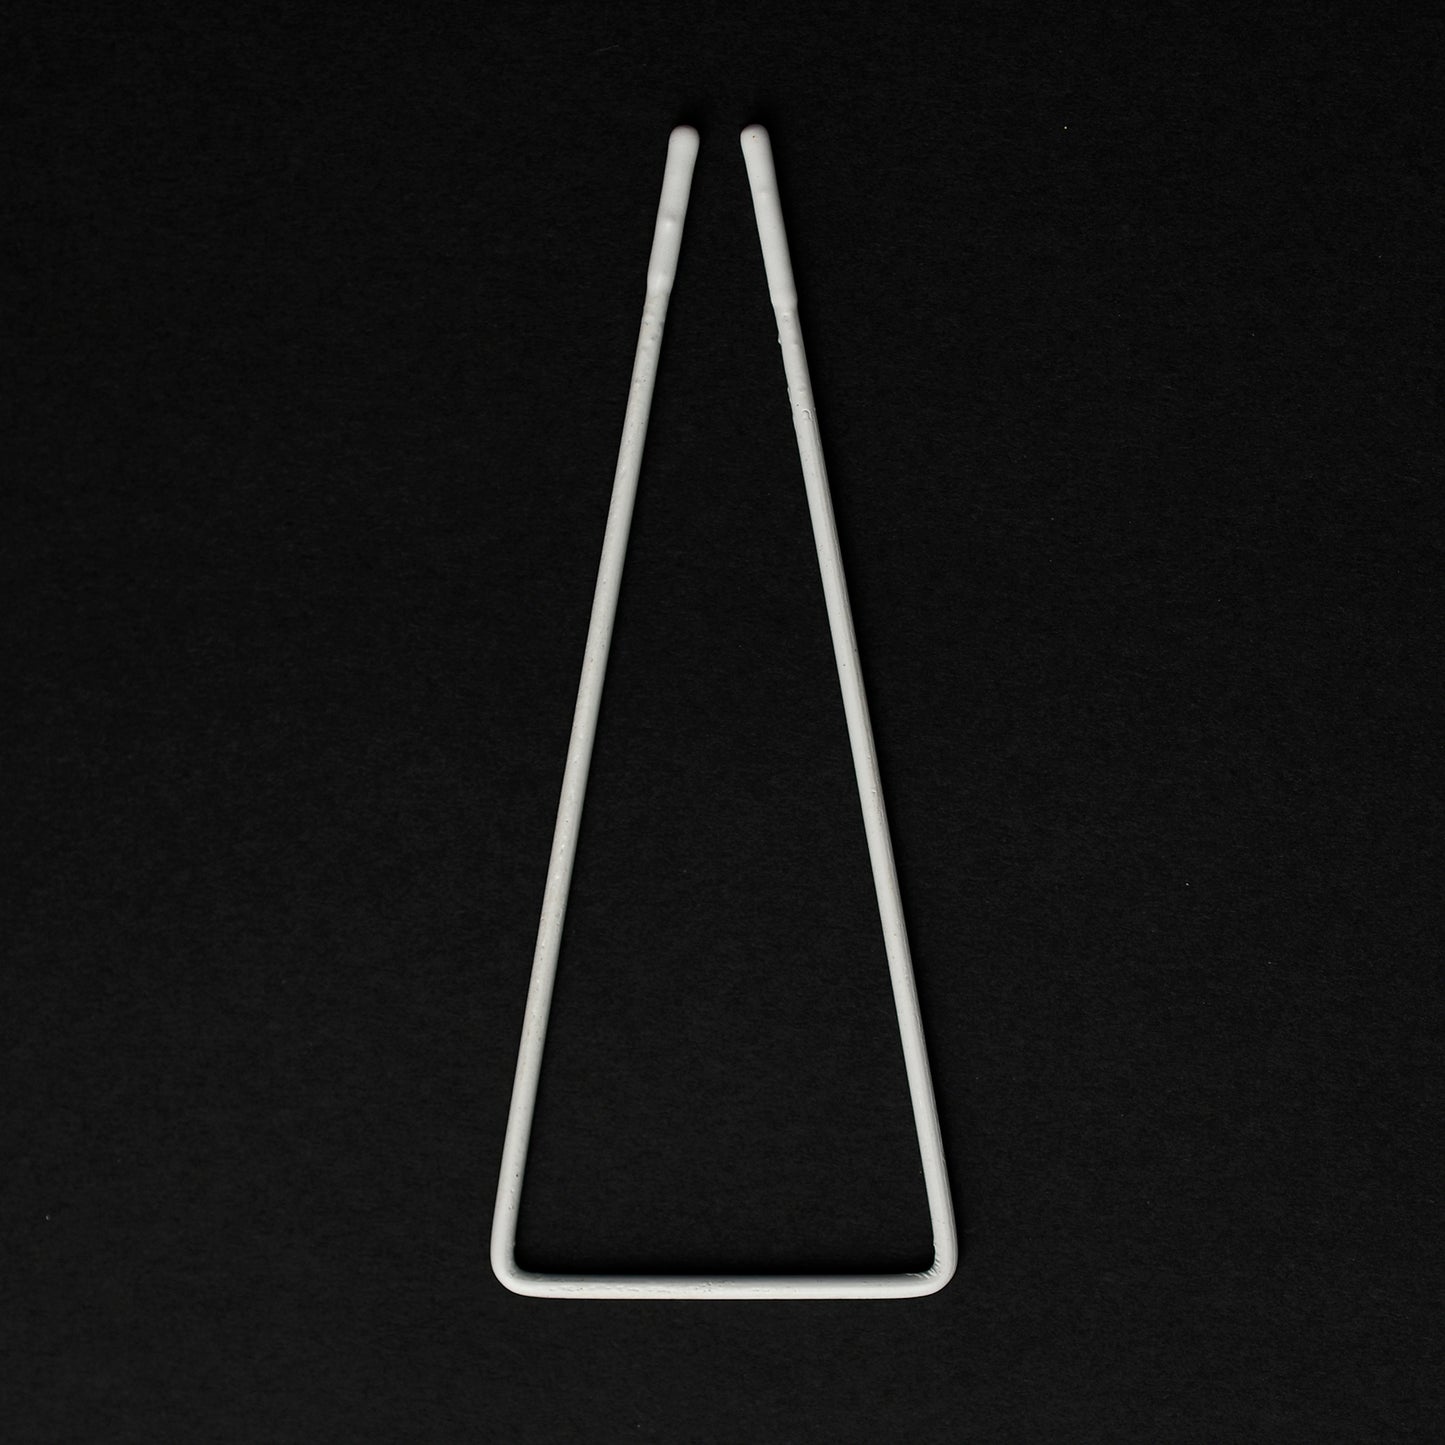 95MM x 38MM NYLON-COATED TRIANGLE SHAPED WIRE